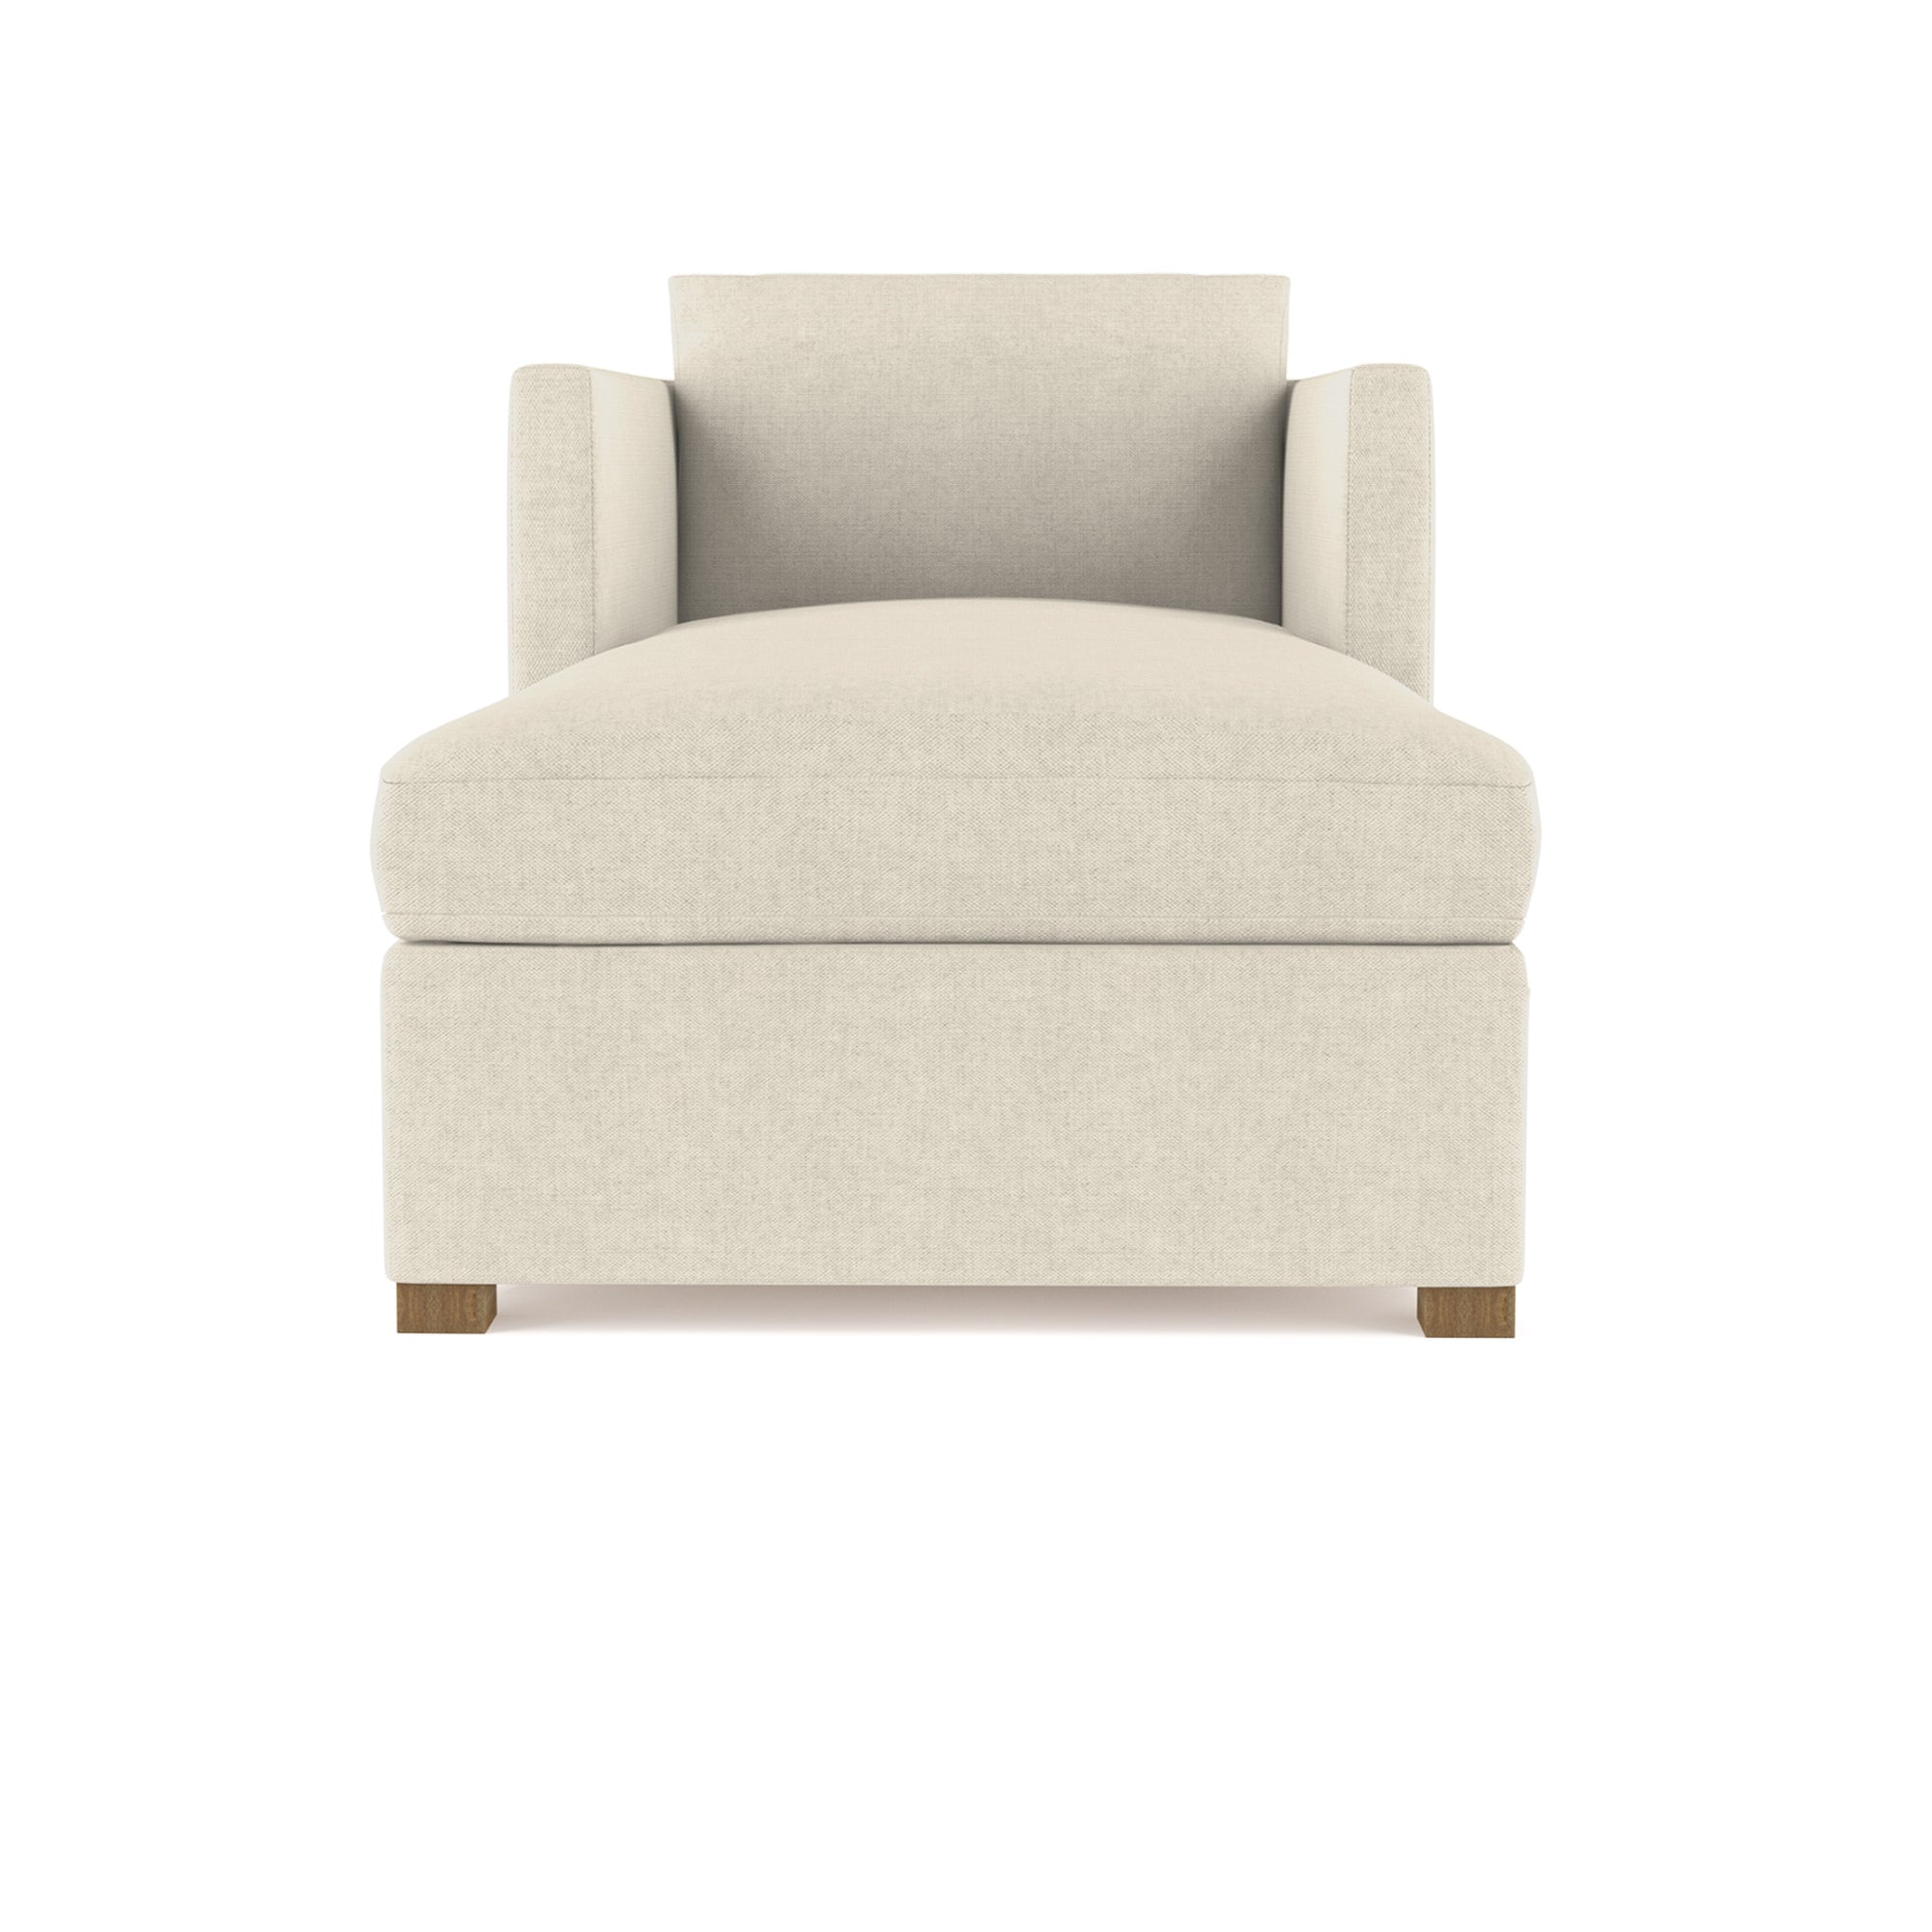 Madison Chaise - Oyster Box Weave Linen